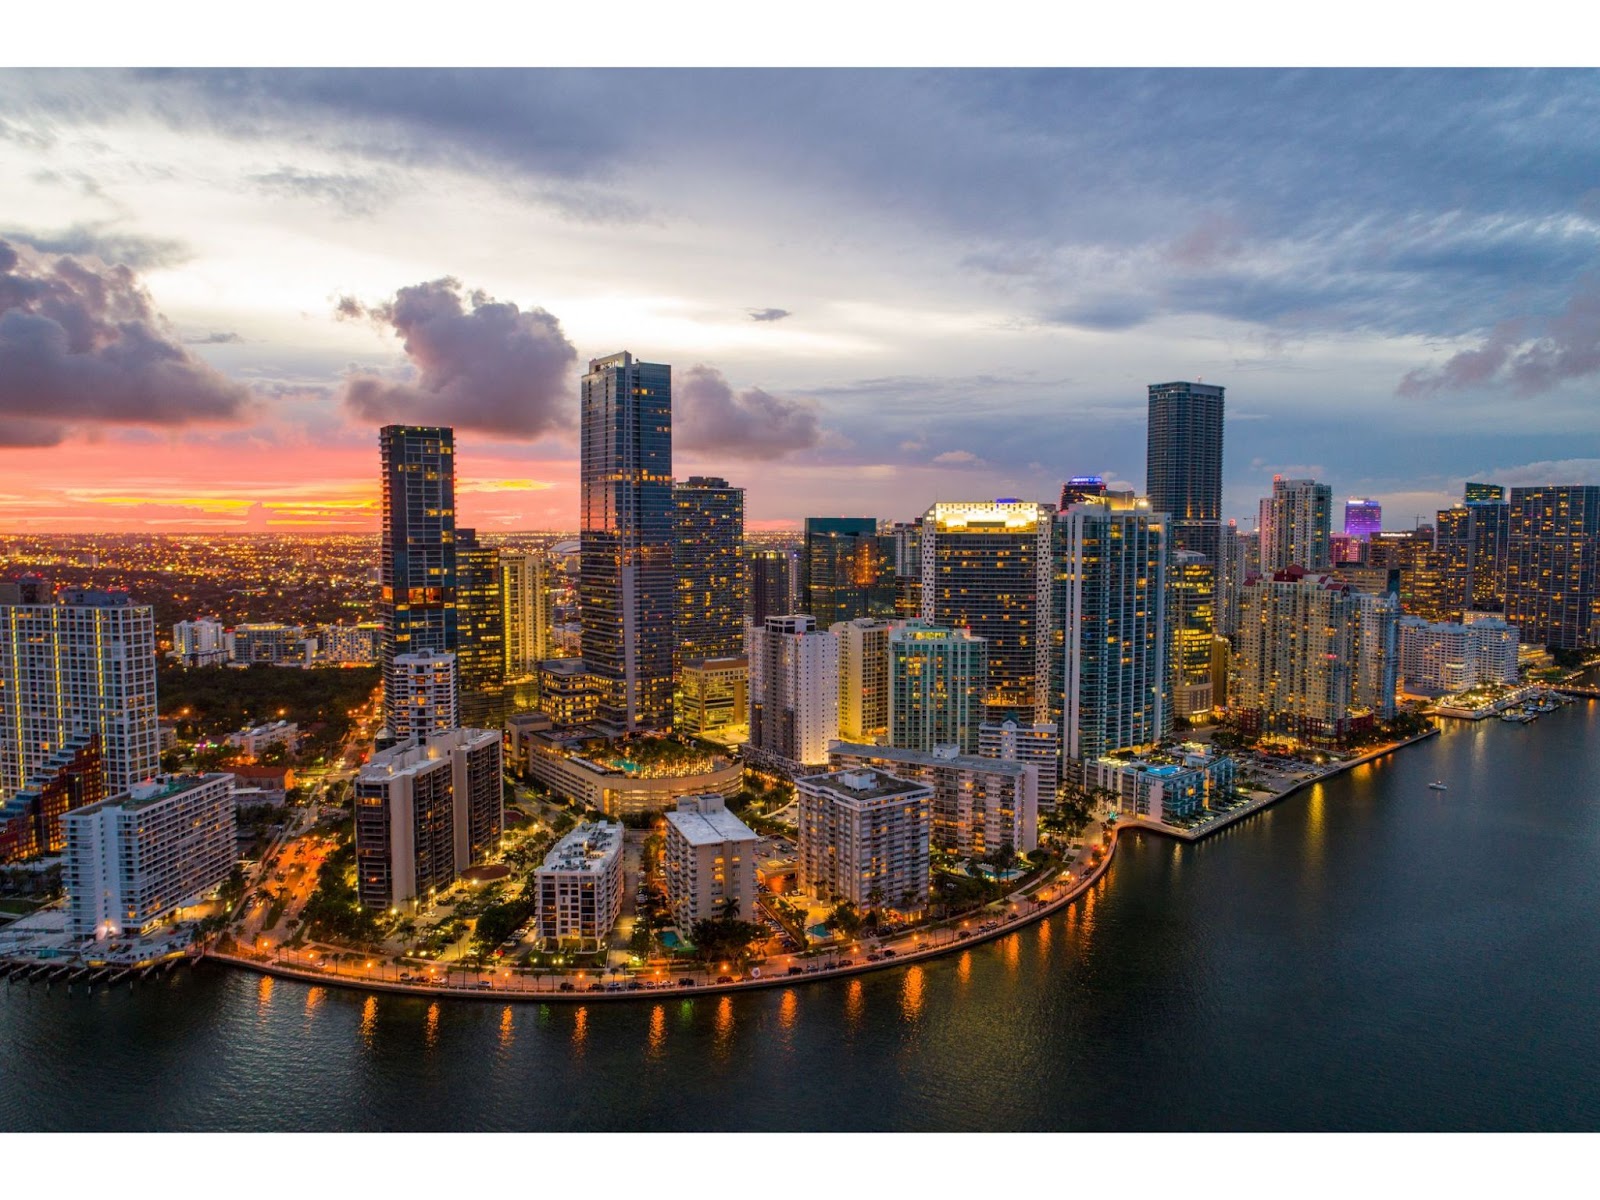 Known as the “Manhattan of the South,” Brickell is Miami’s Financial District, but is also a highly coveted waterfront neighborhood to work, live and play.